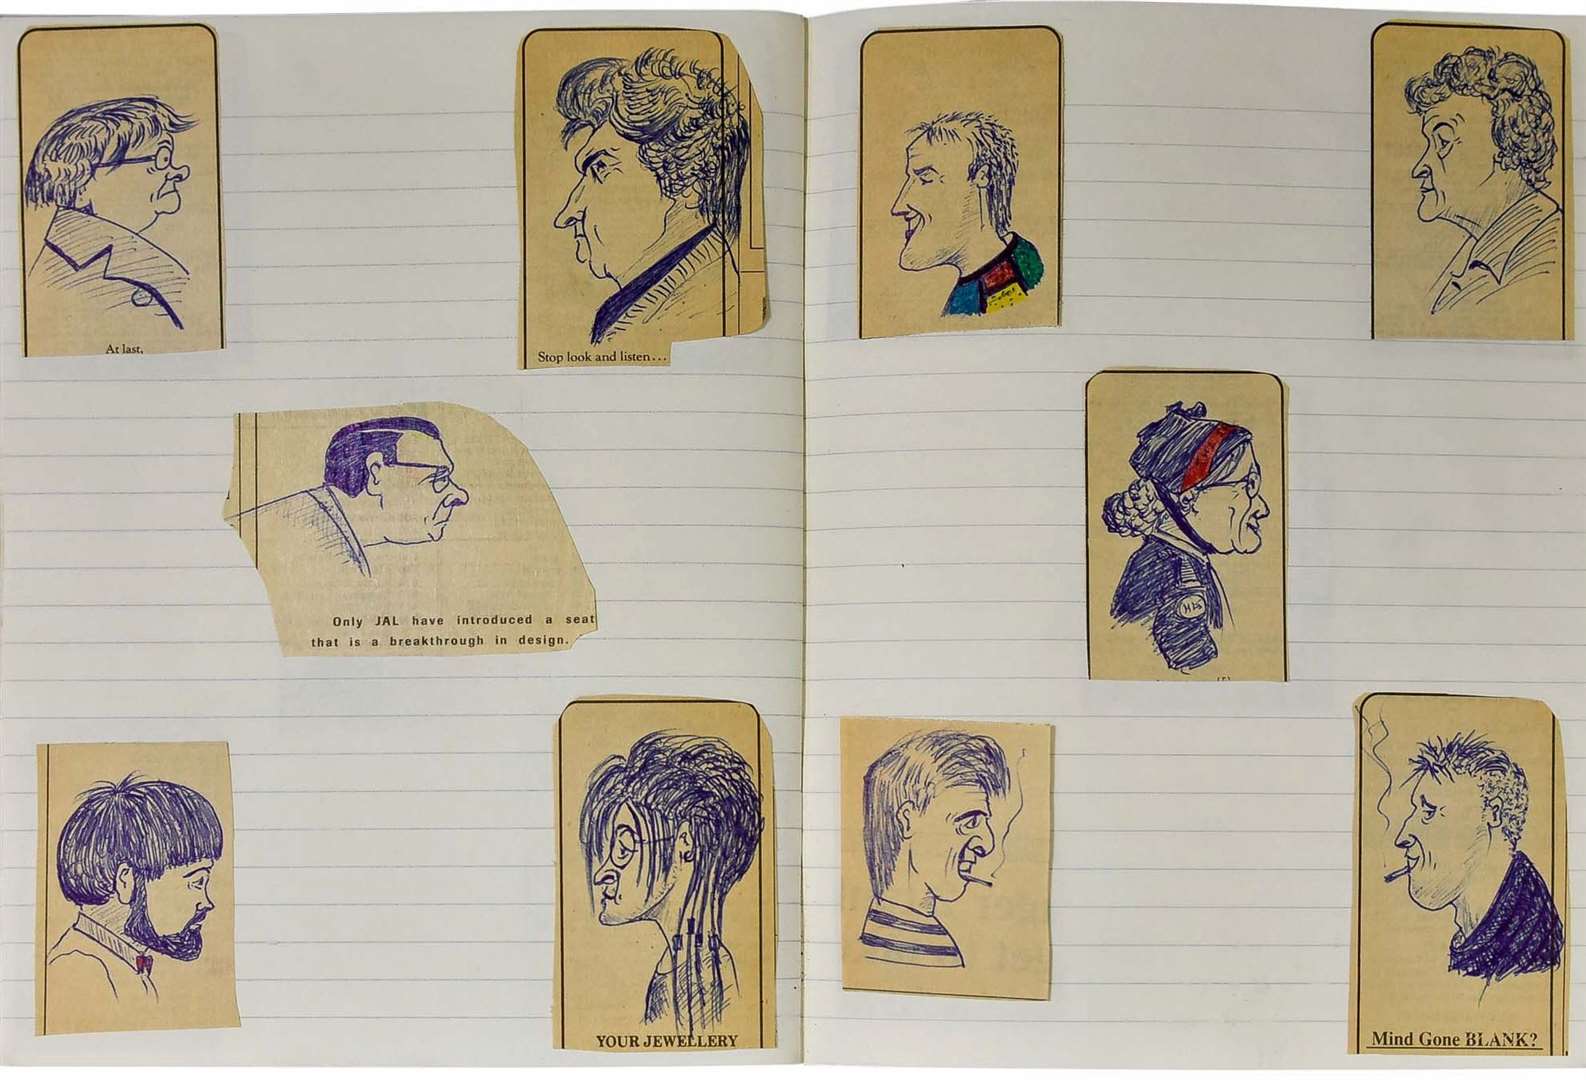 A large selection of caricature profiles penned by Peter Cushing on his regular visits to The Tudor Tea Rooms in Harbour Street, Whitstable,sold for £800